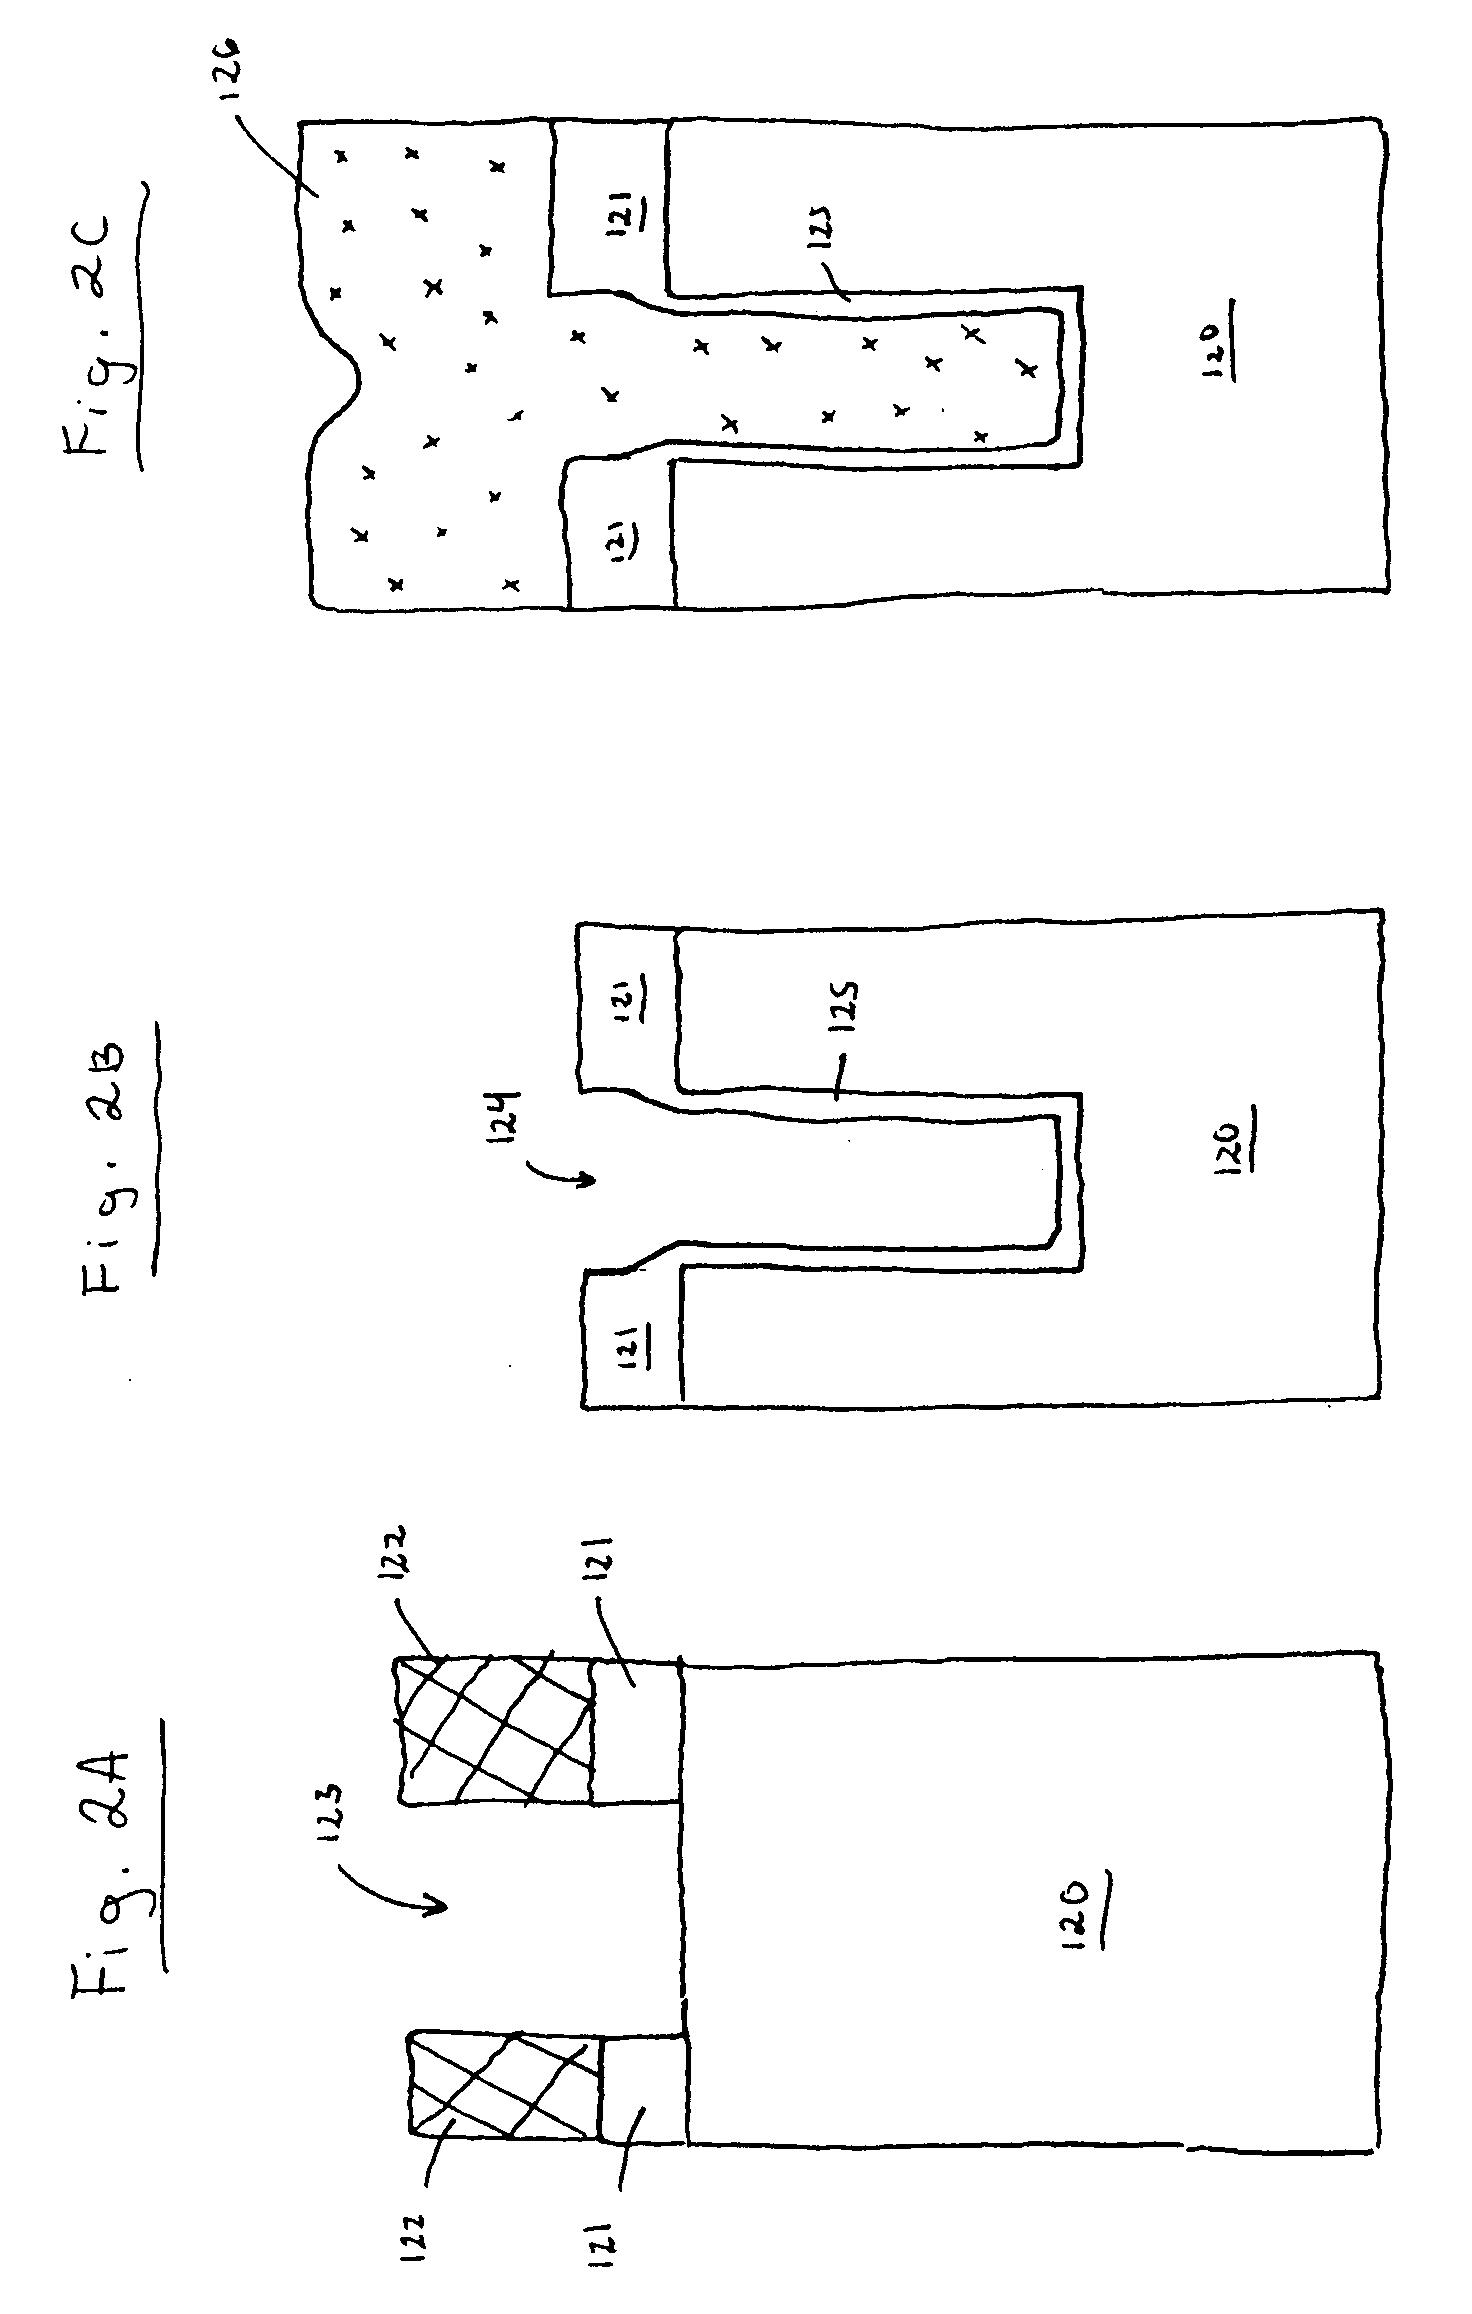 Isolation structures for semiconductor integrated circuit substrates and methods of forming the same